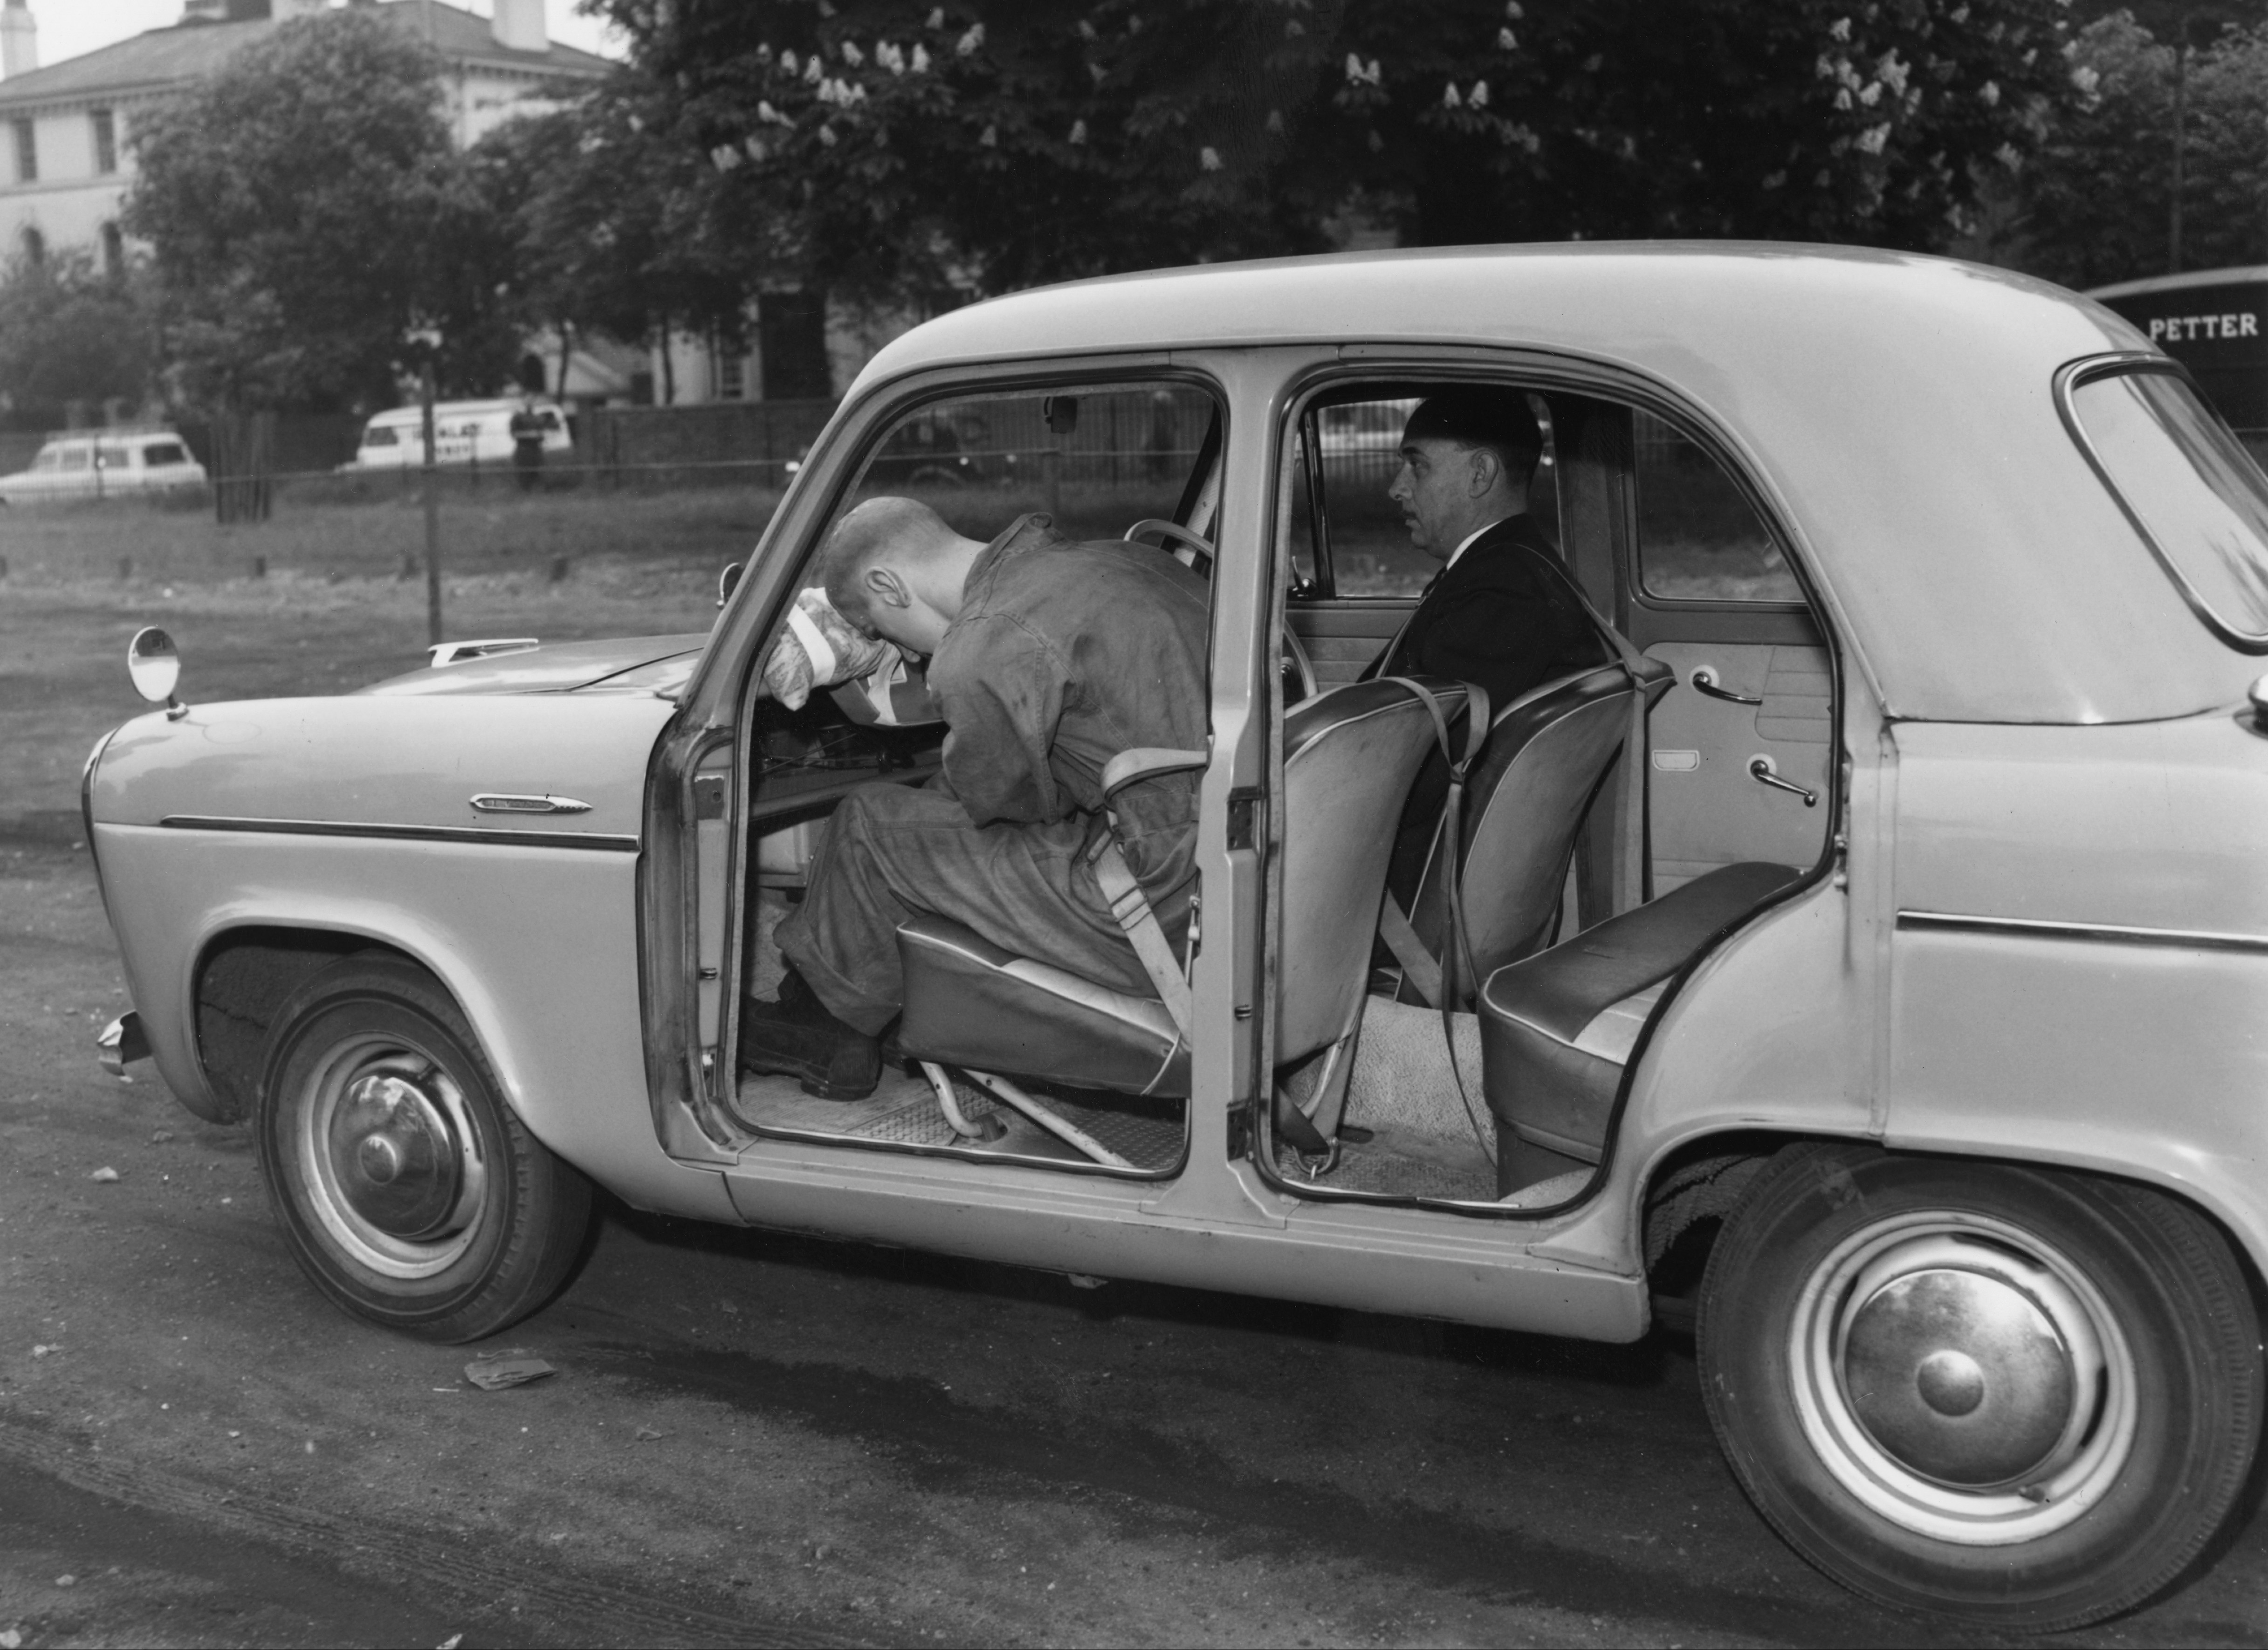 A demonstration of the efficacy of seat belts in 1960.